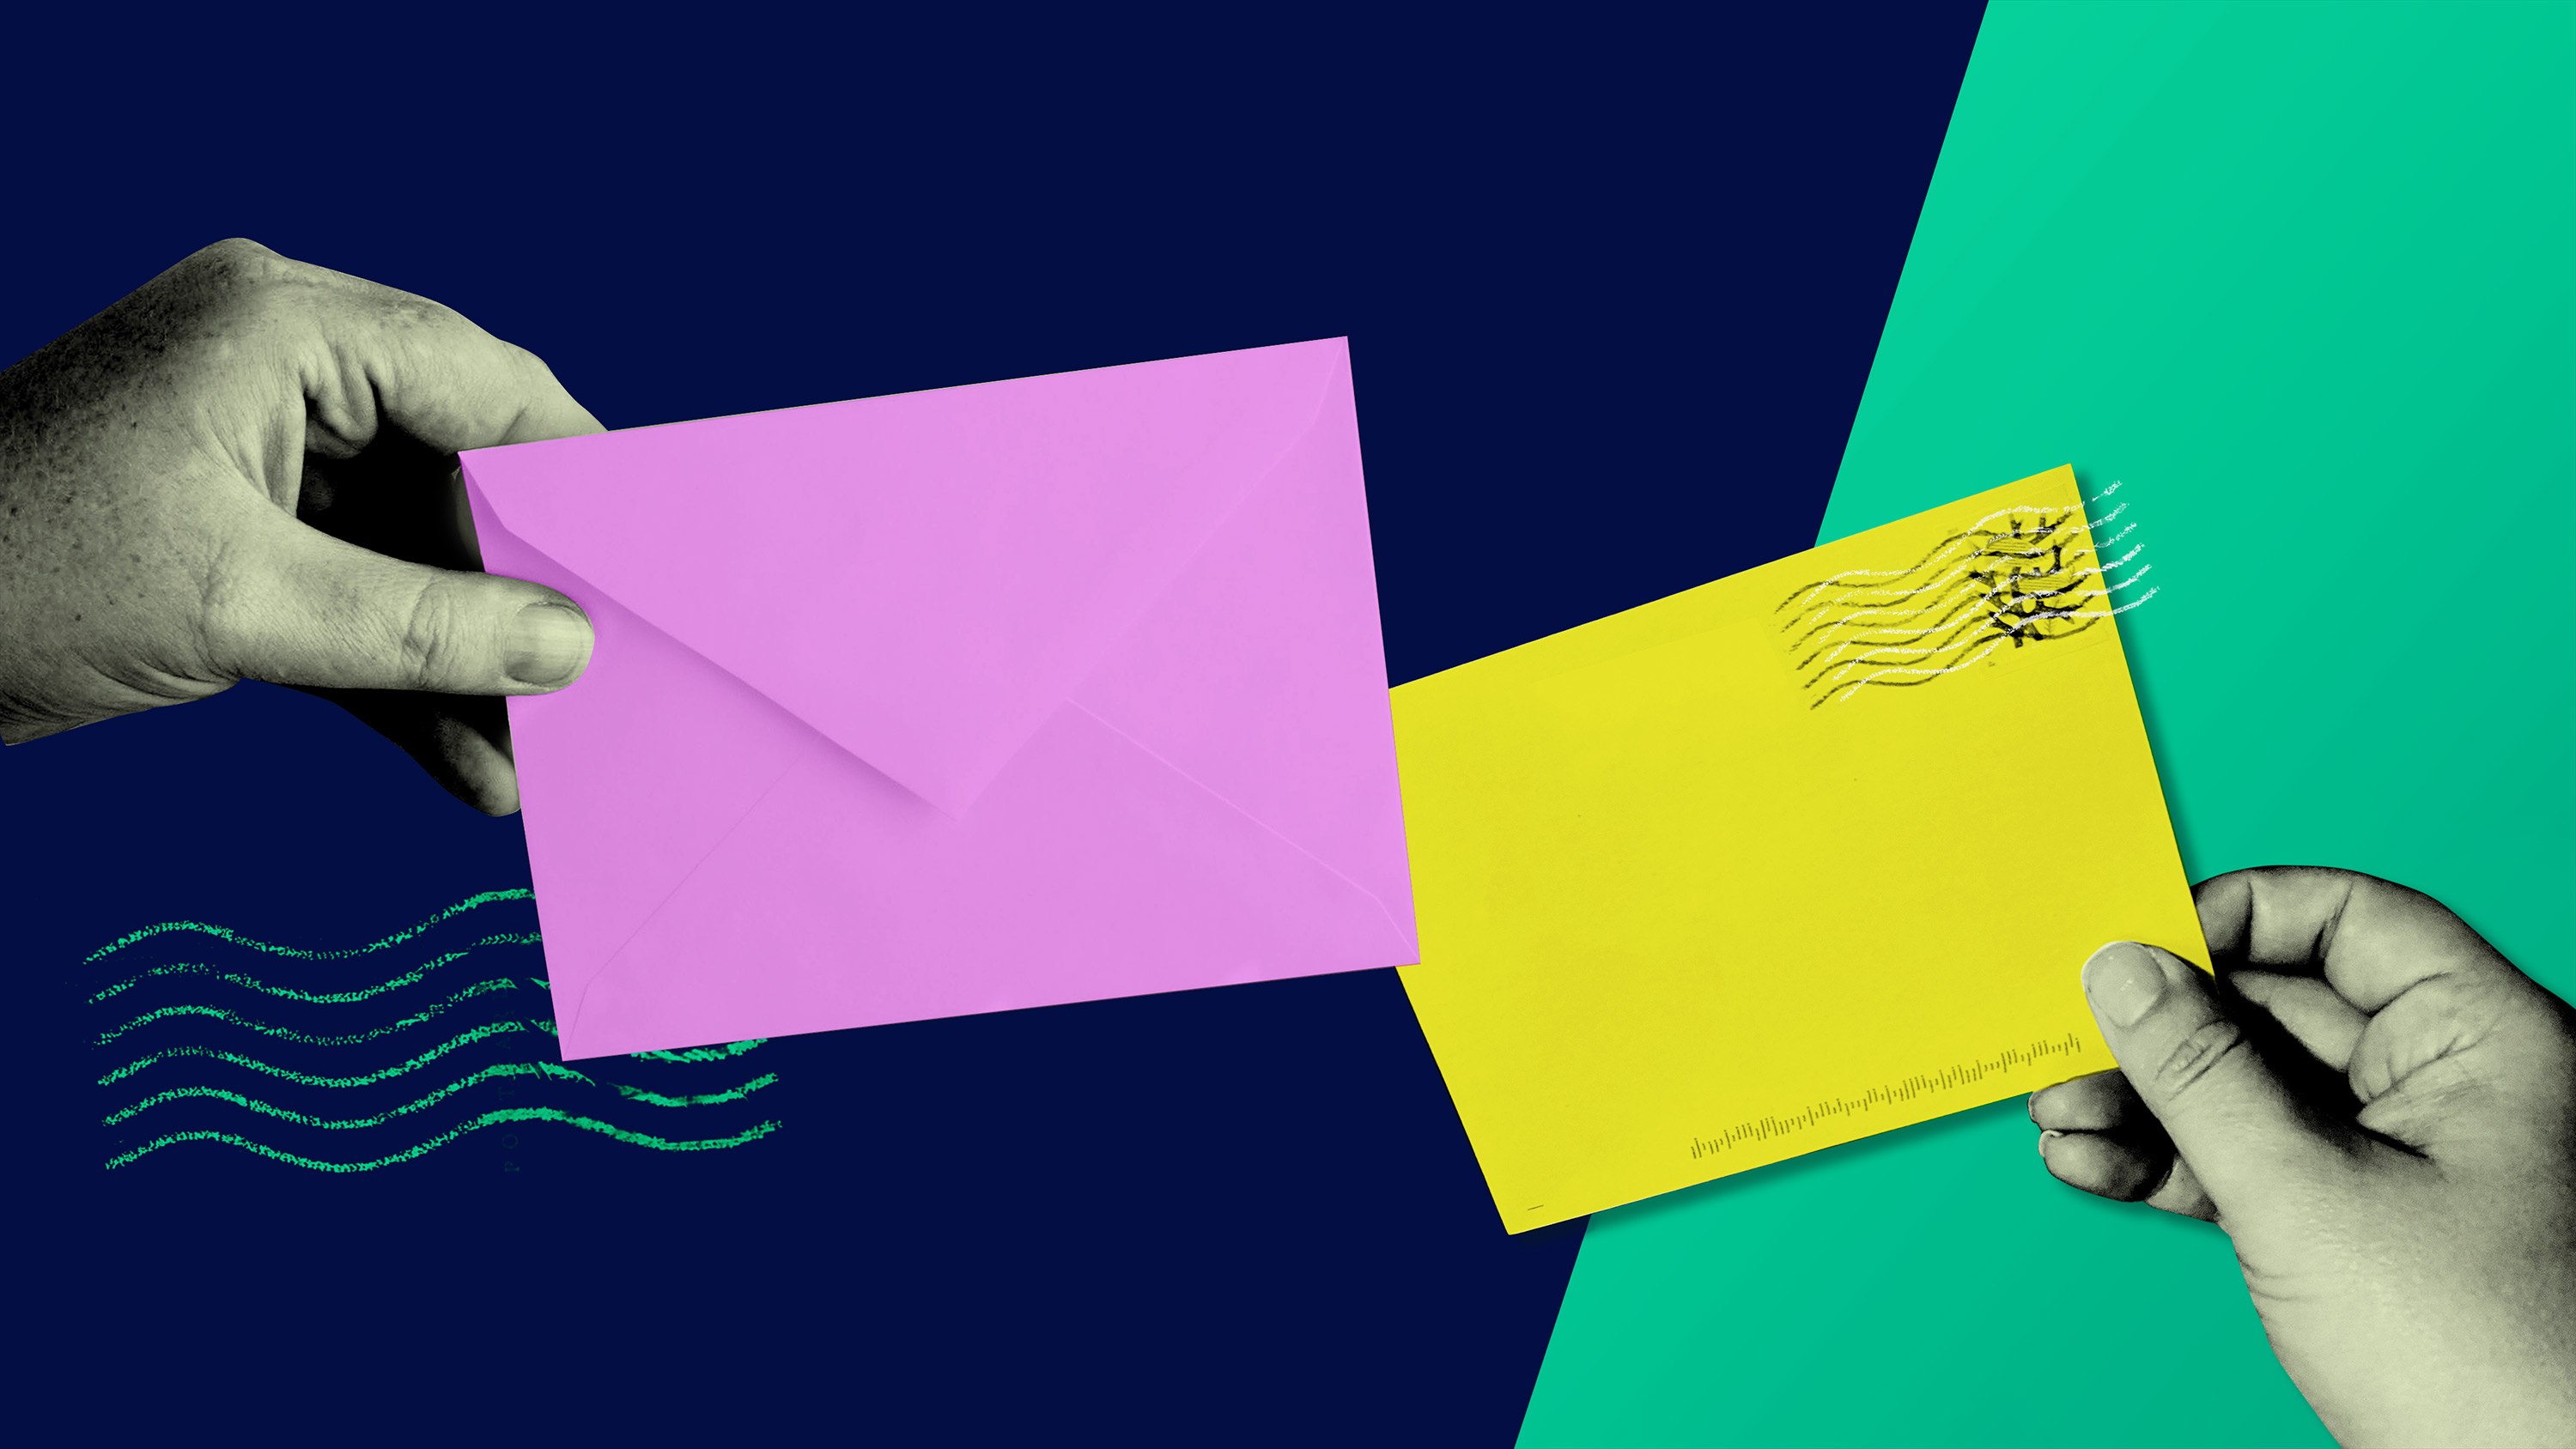 two hands holding envelopes left is pink right is yellow background is indigo on left and green on right